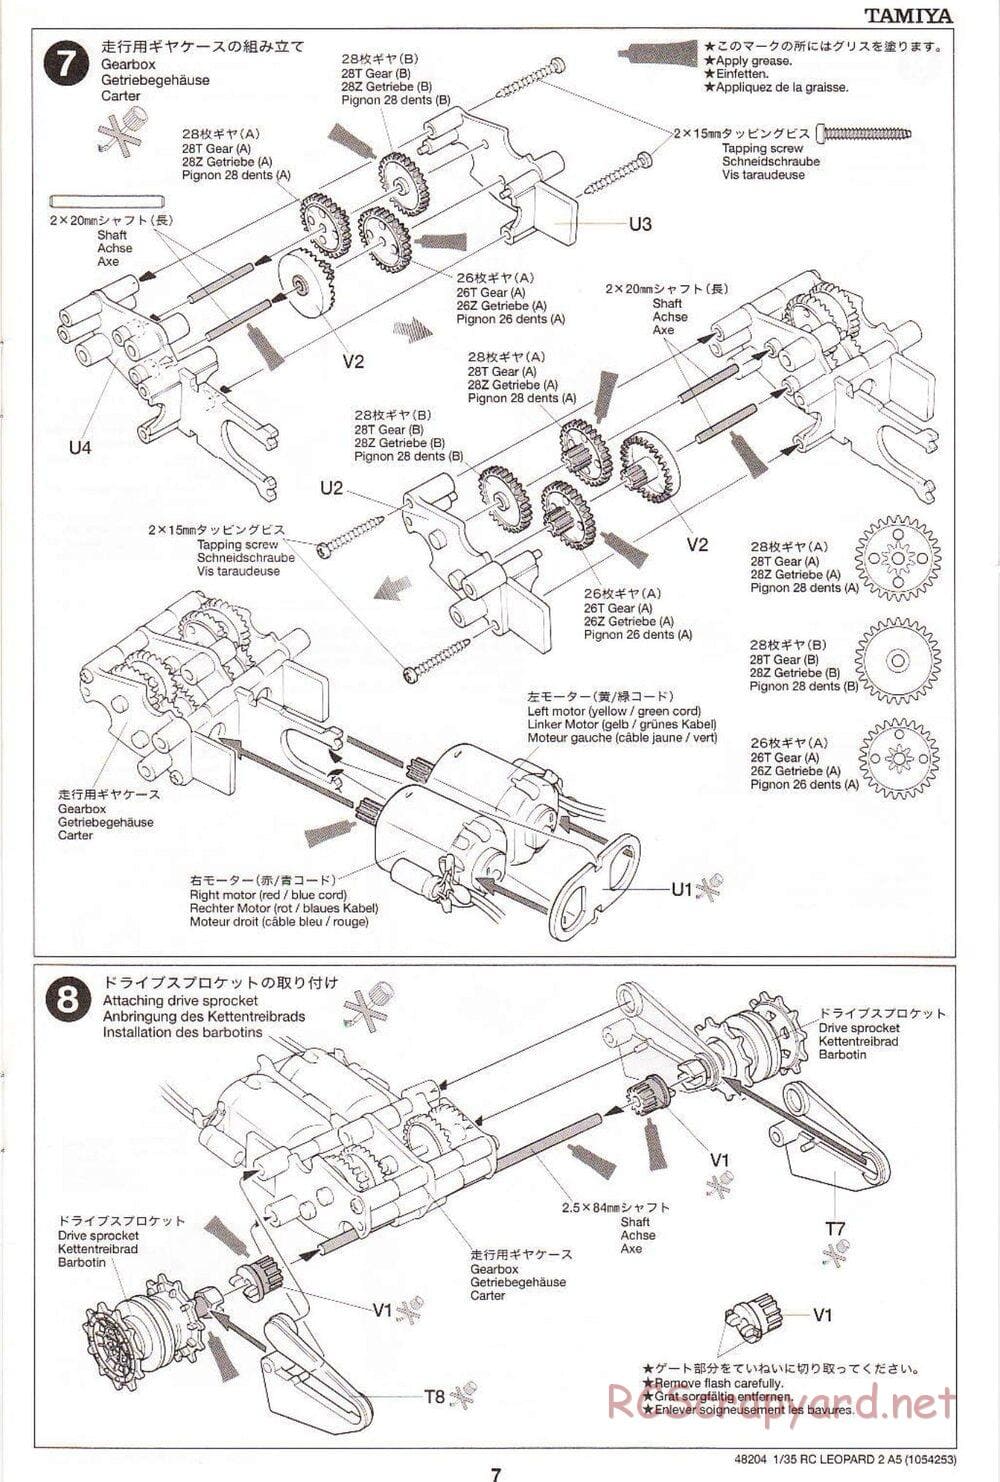 Tamiya - Leopard 2 A5 Main Battle Tank - 1/35 Scale Chassis - Manual - Page 7